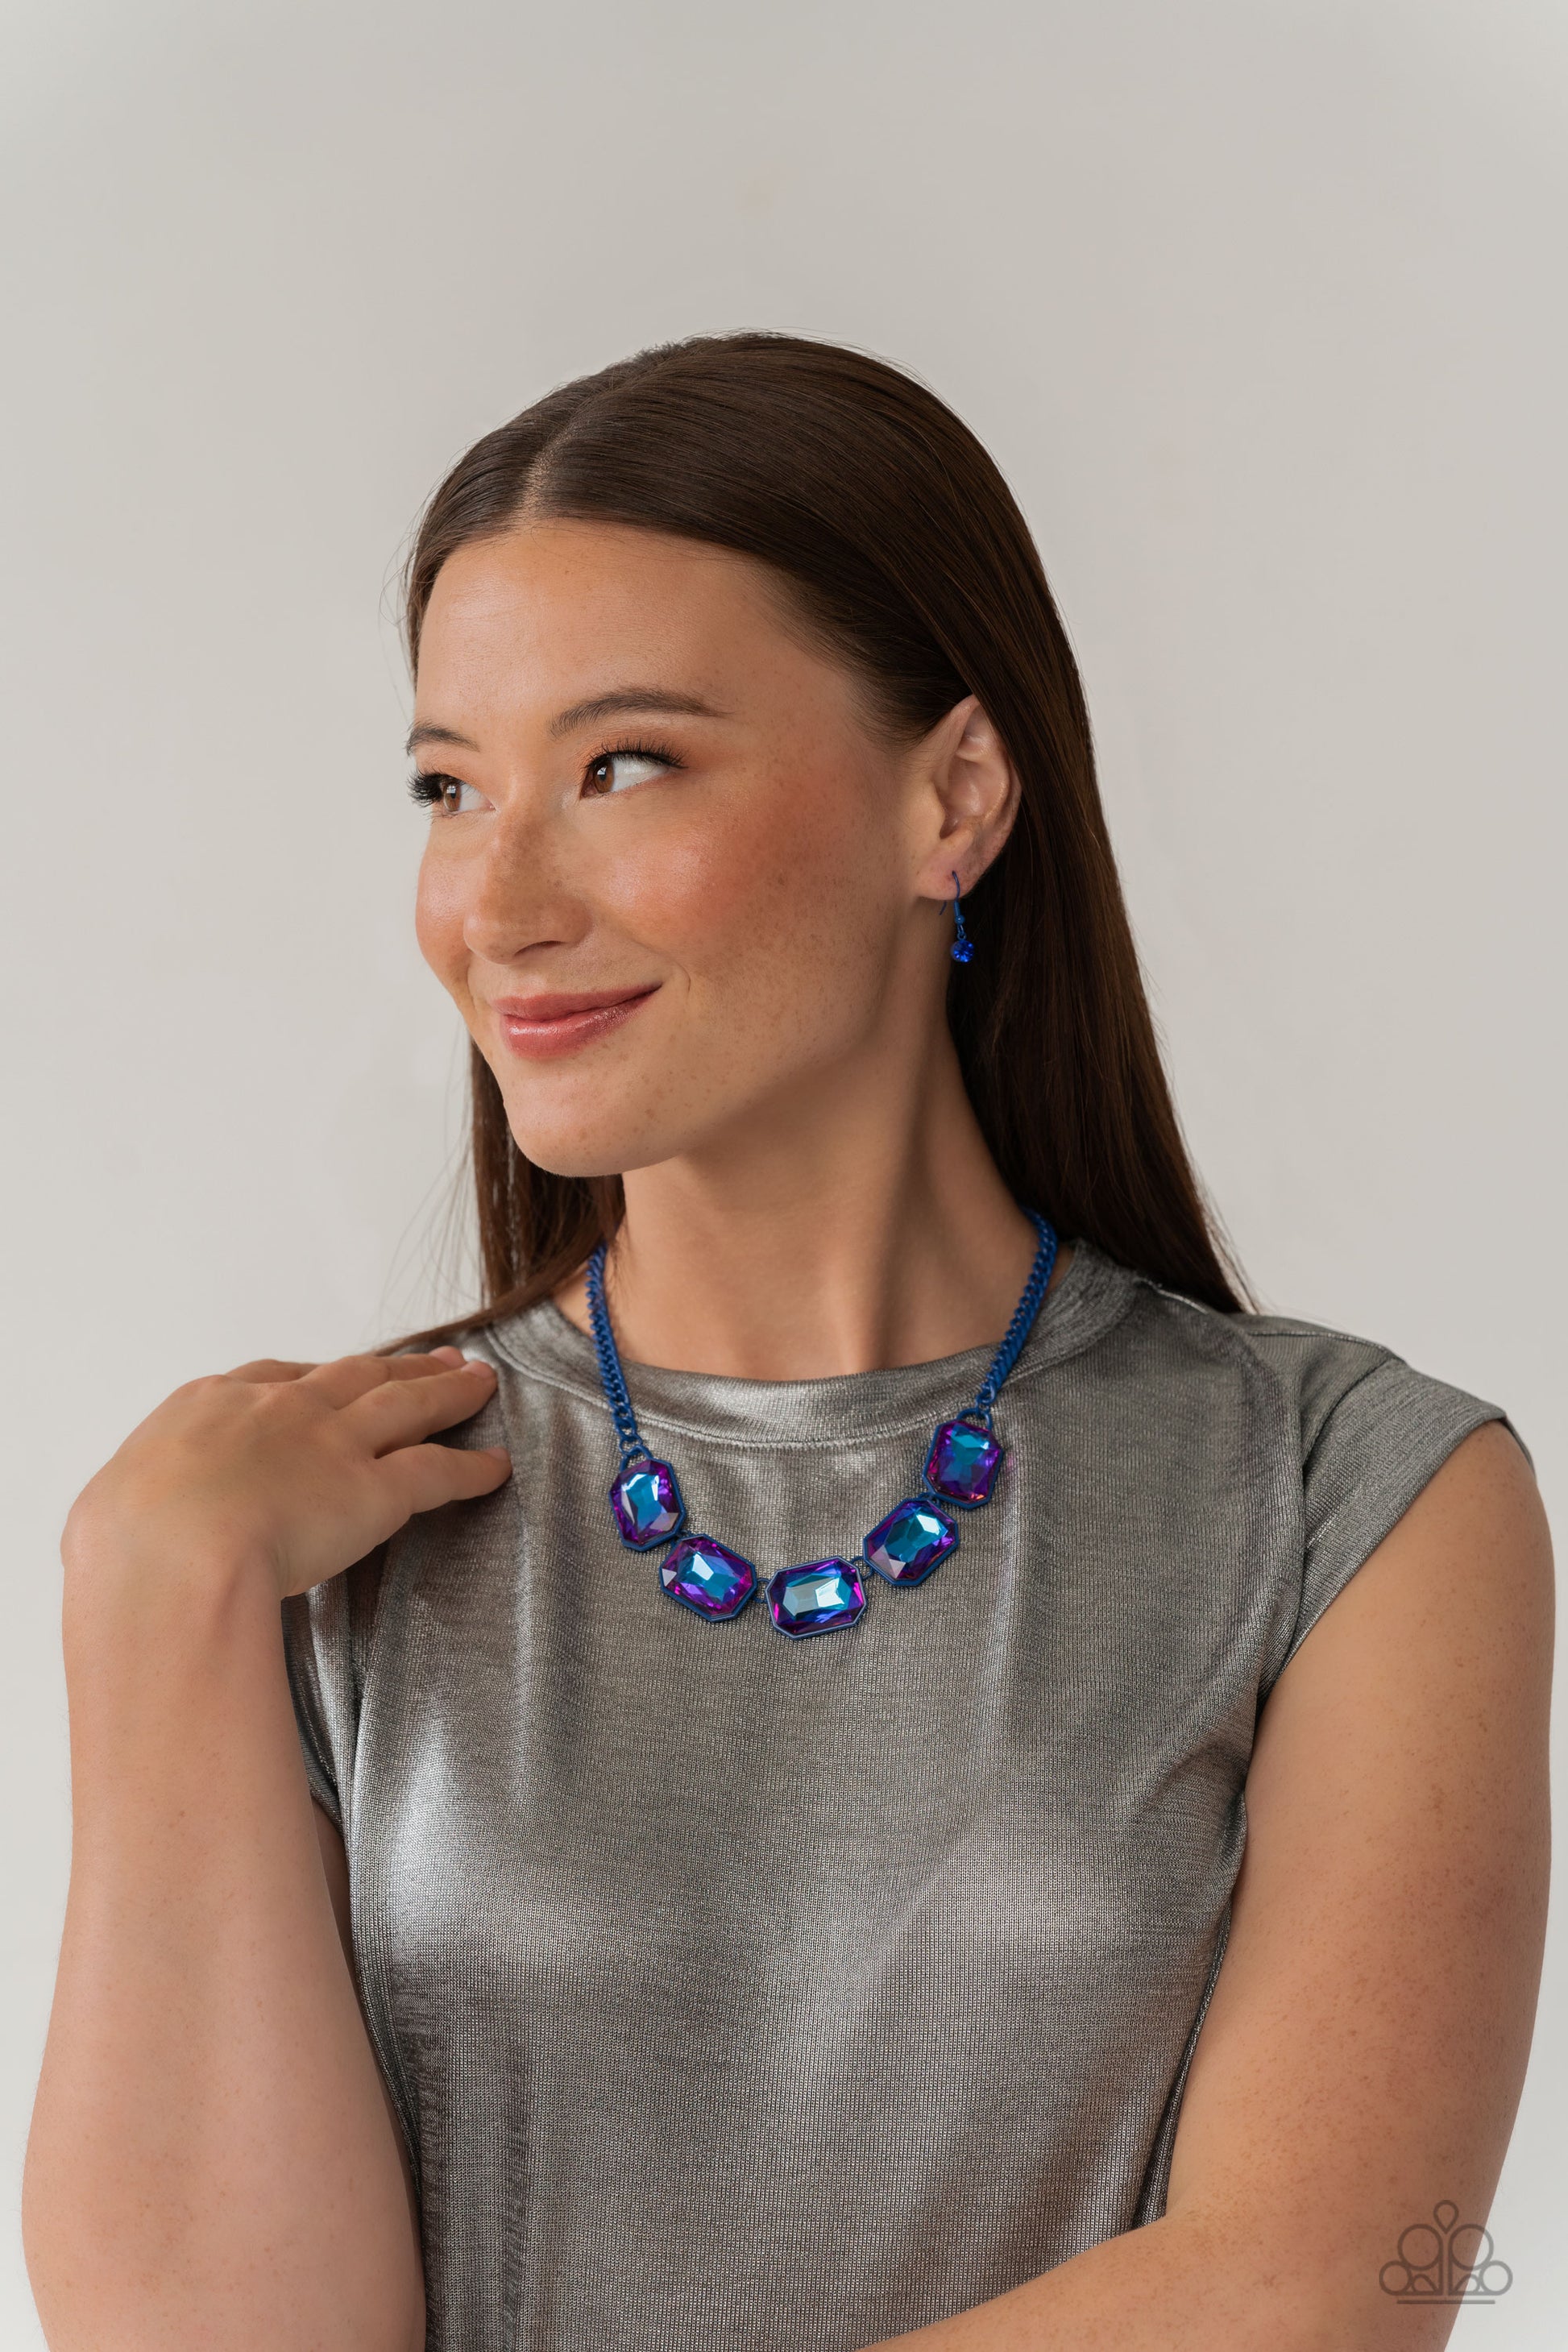 Paparazzi Accessories Emerald City Couture - Blue Featuring a vivacious blue chain, a collection of purple UV shimmery emerald-cut gems, pressed in vibrant blue frames, coalesces around the collar to create a playful pop of edgy color. Features an adjusta